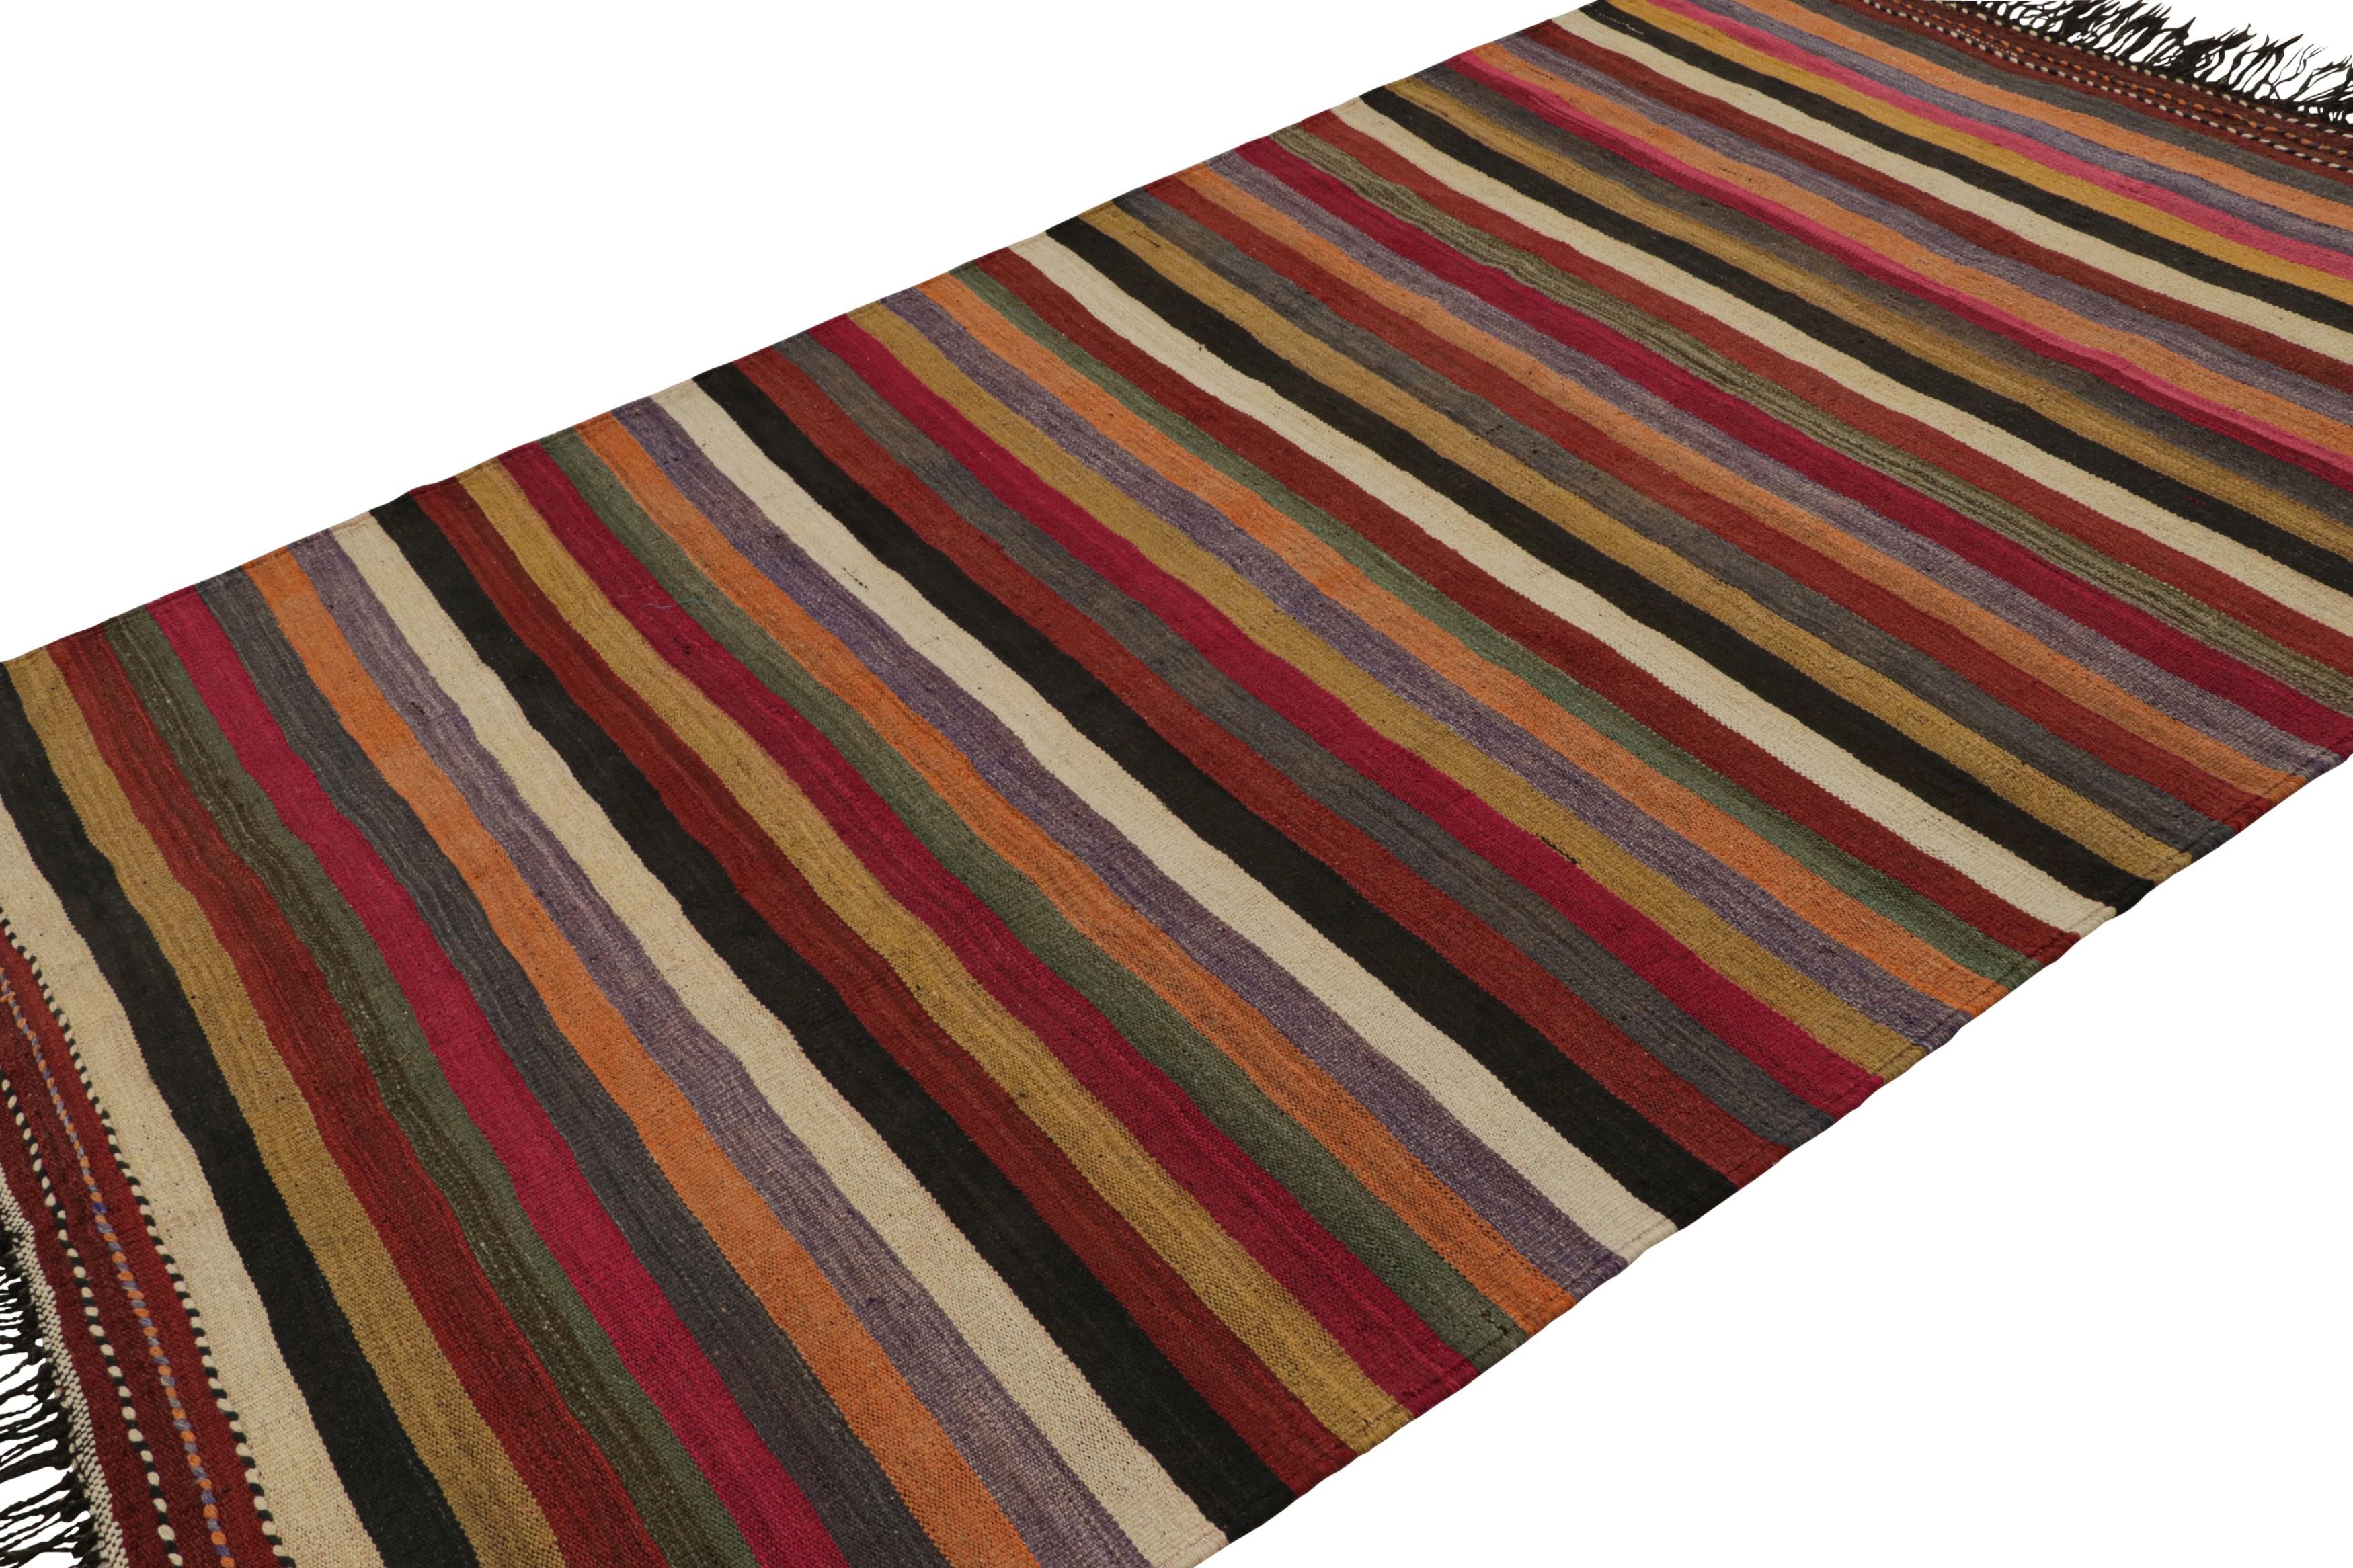 Handwoven in wool, circa 1950-1960, this 6x10 vintage Afghan tribal kilim rug, features a simple repeat pattern with playful color variations of red, green, beige/brown and purple, showcasing a movement and a life in the design. 

On the Design: